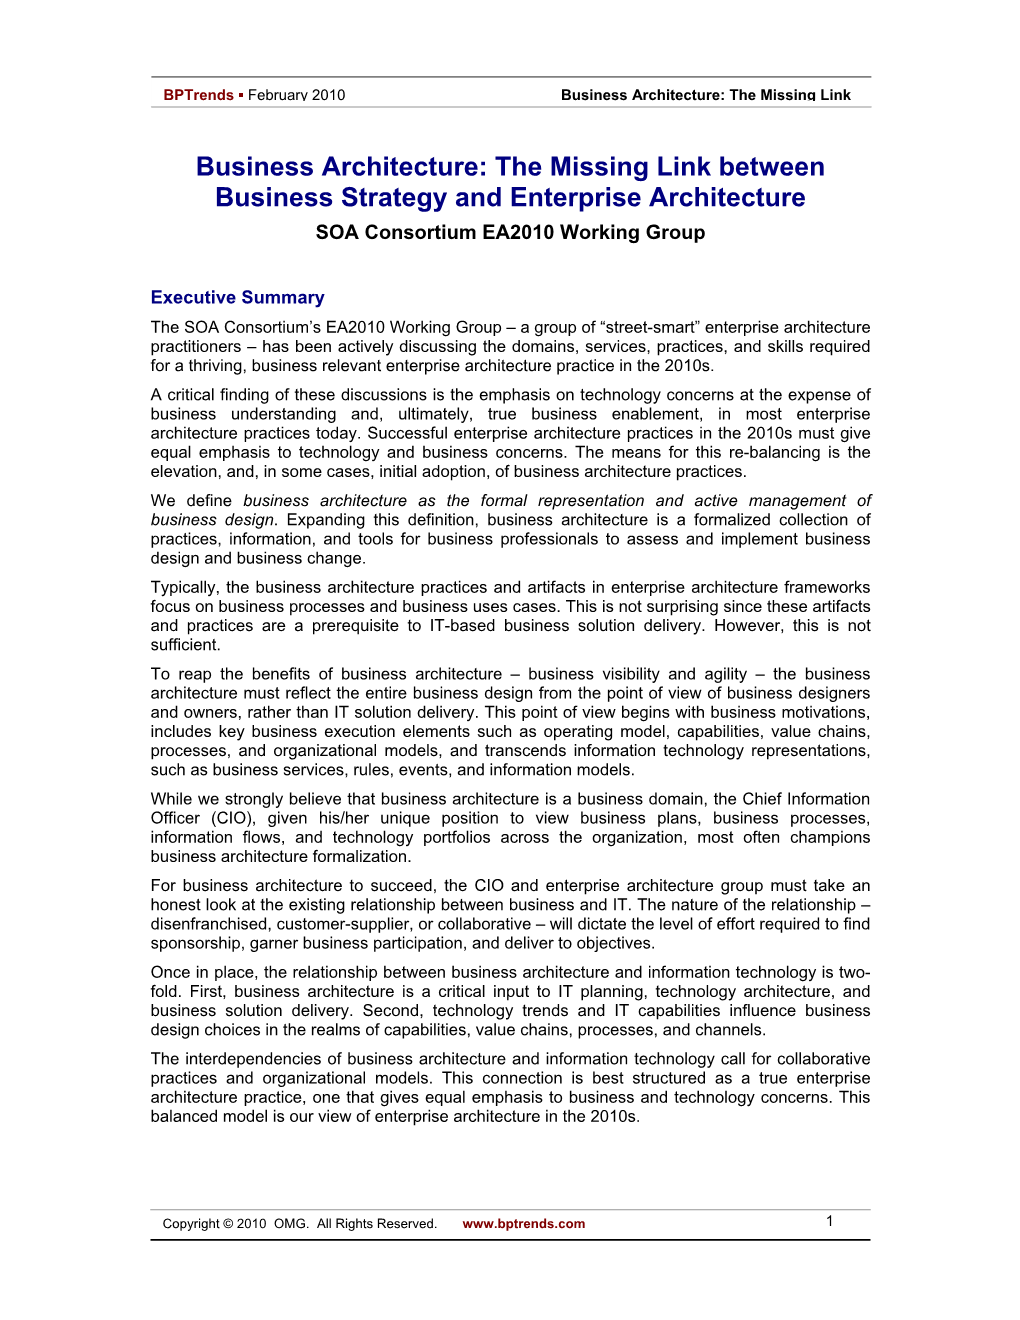 The Missing Link Between Business Strategy and Enterprise Architecture SOA Consortium EA2010 Working Group